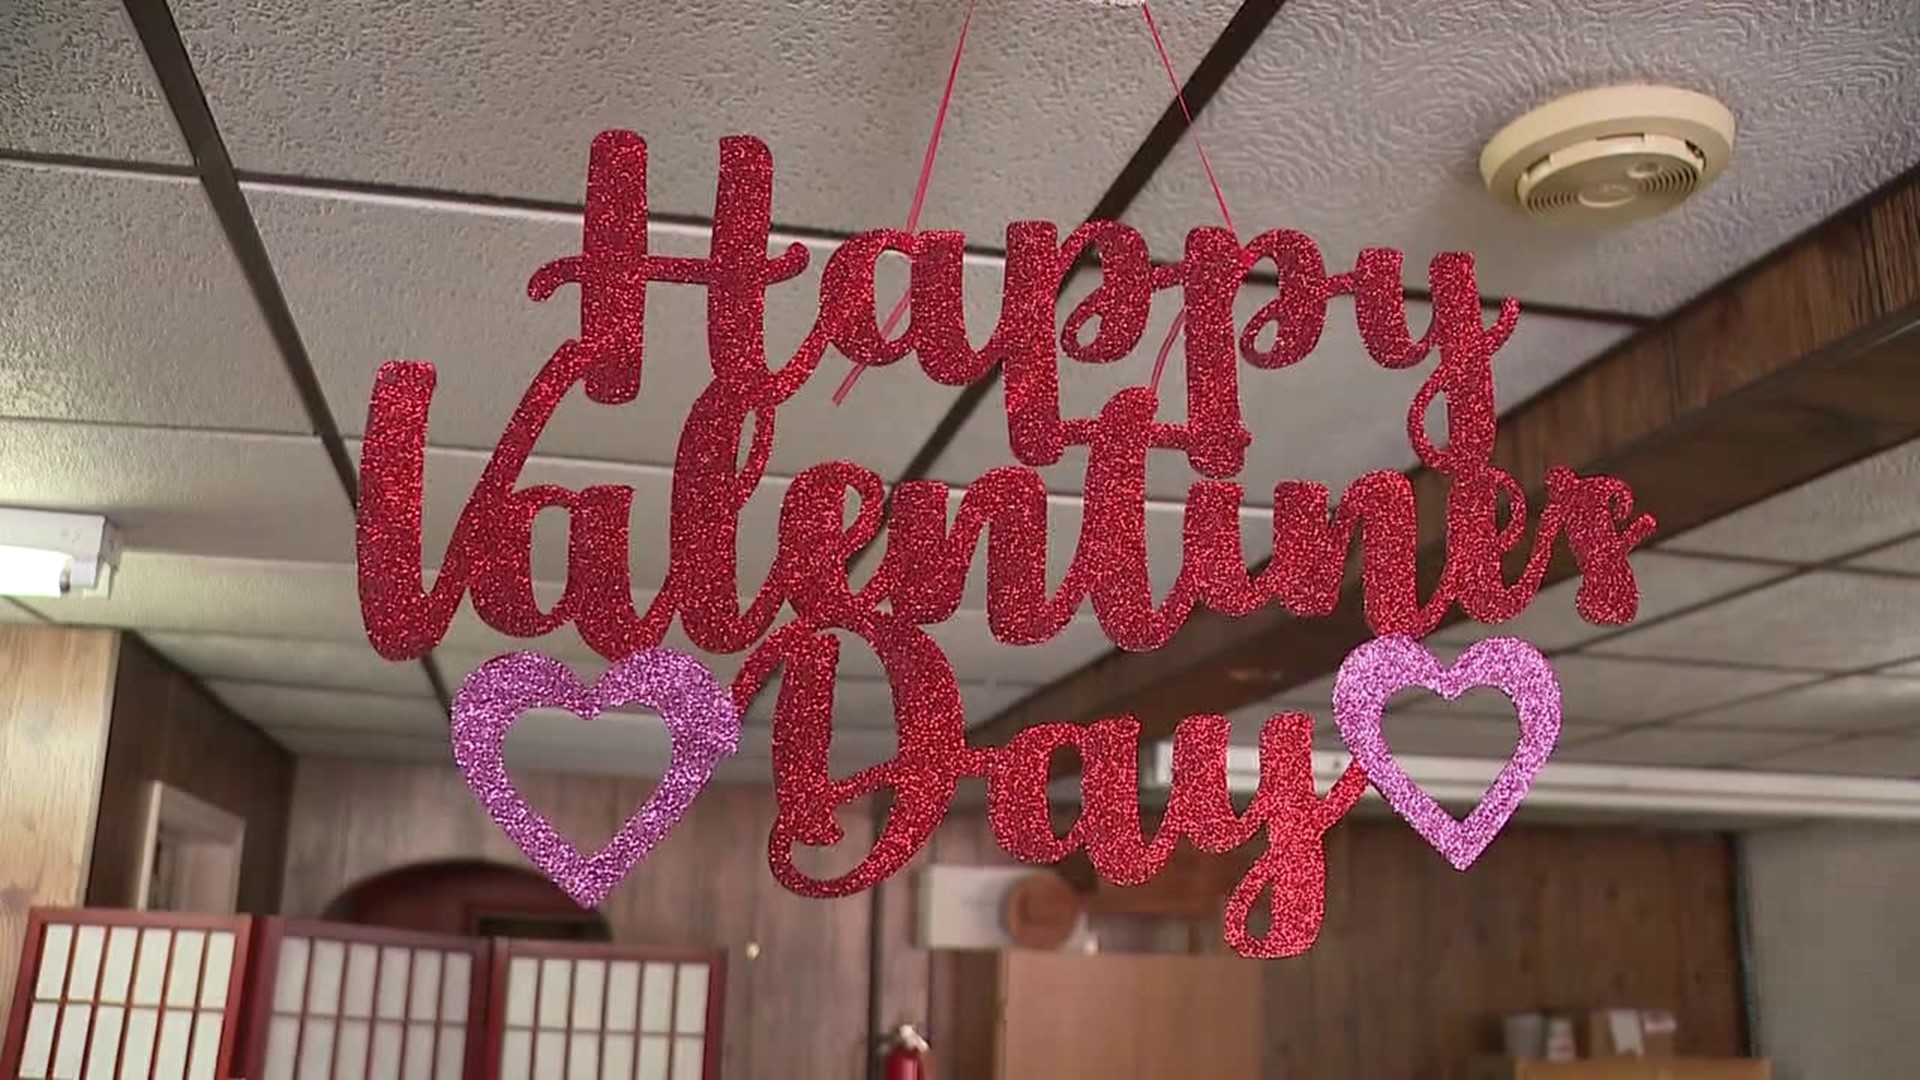 Locally-owned businesses are catering to both crowds, as Valentine's Day and Ash Wednesday fall on the same day for the first time since 2018.